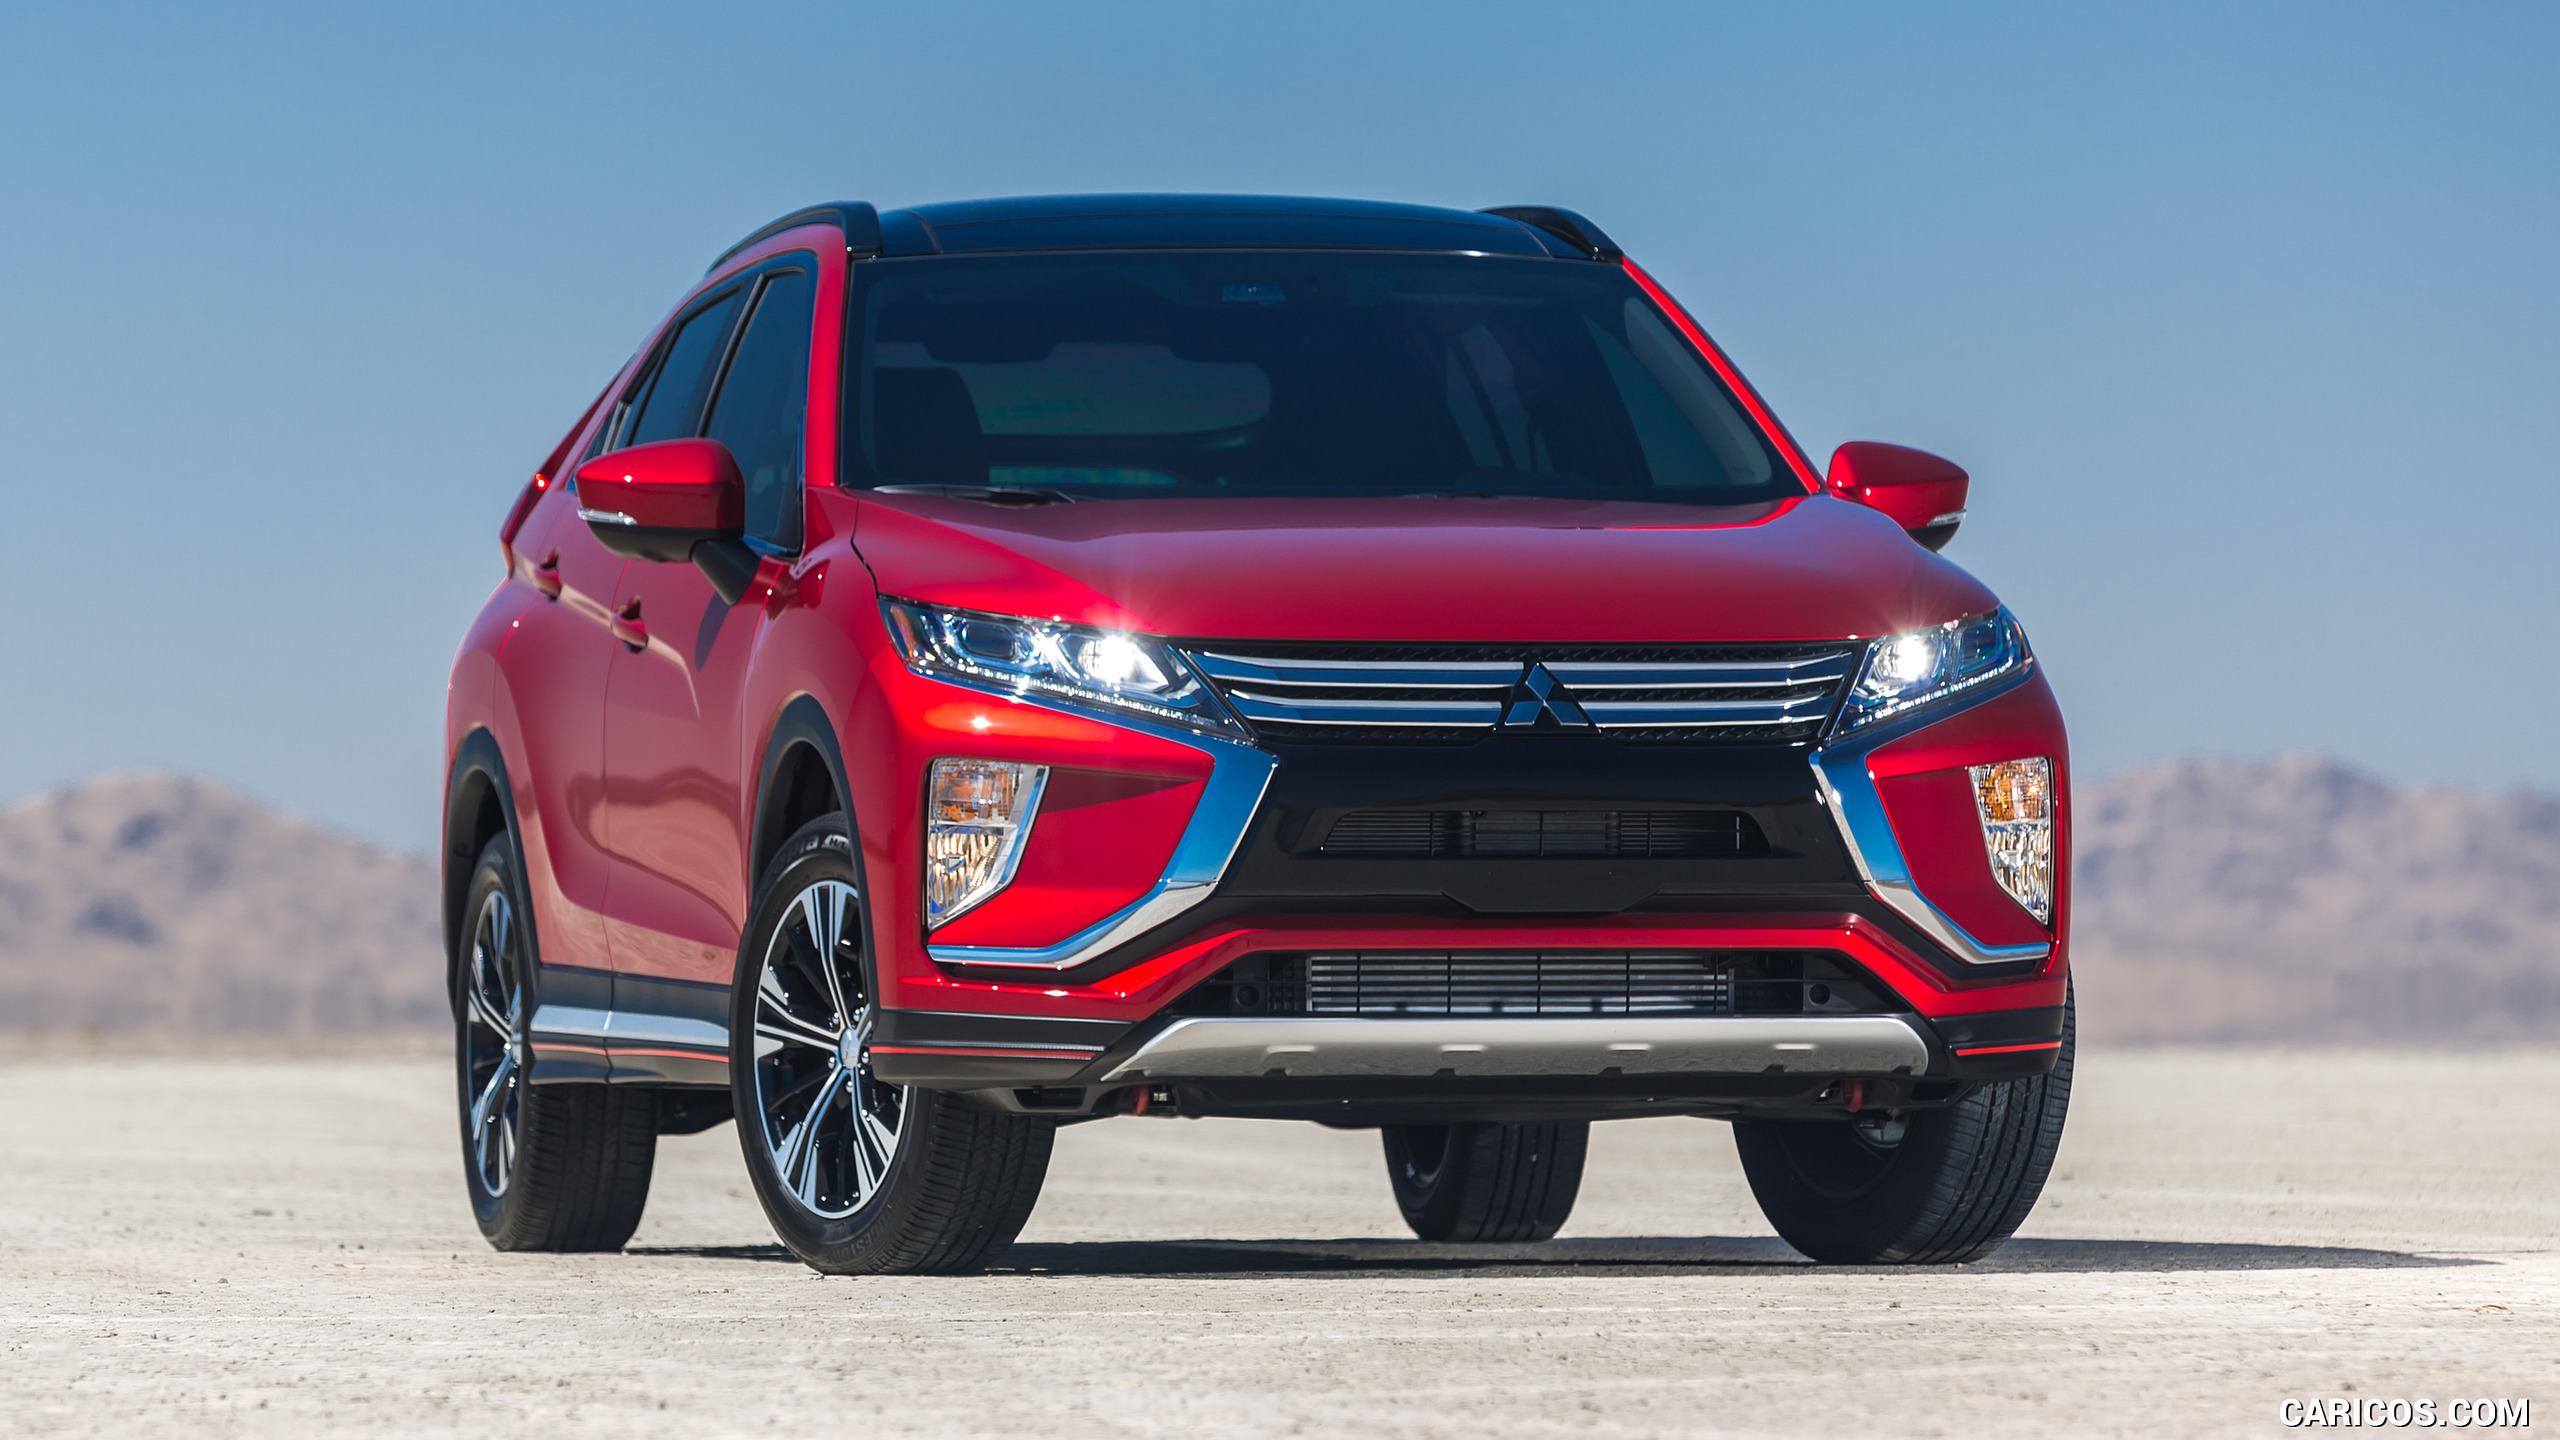 2018 Mitsubishi Eclipse Cross - Front, #6 of 173